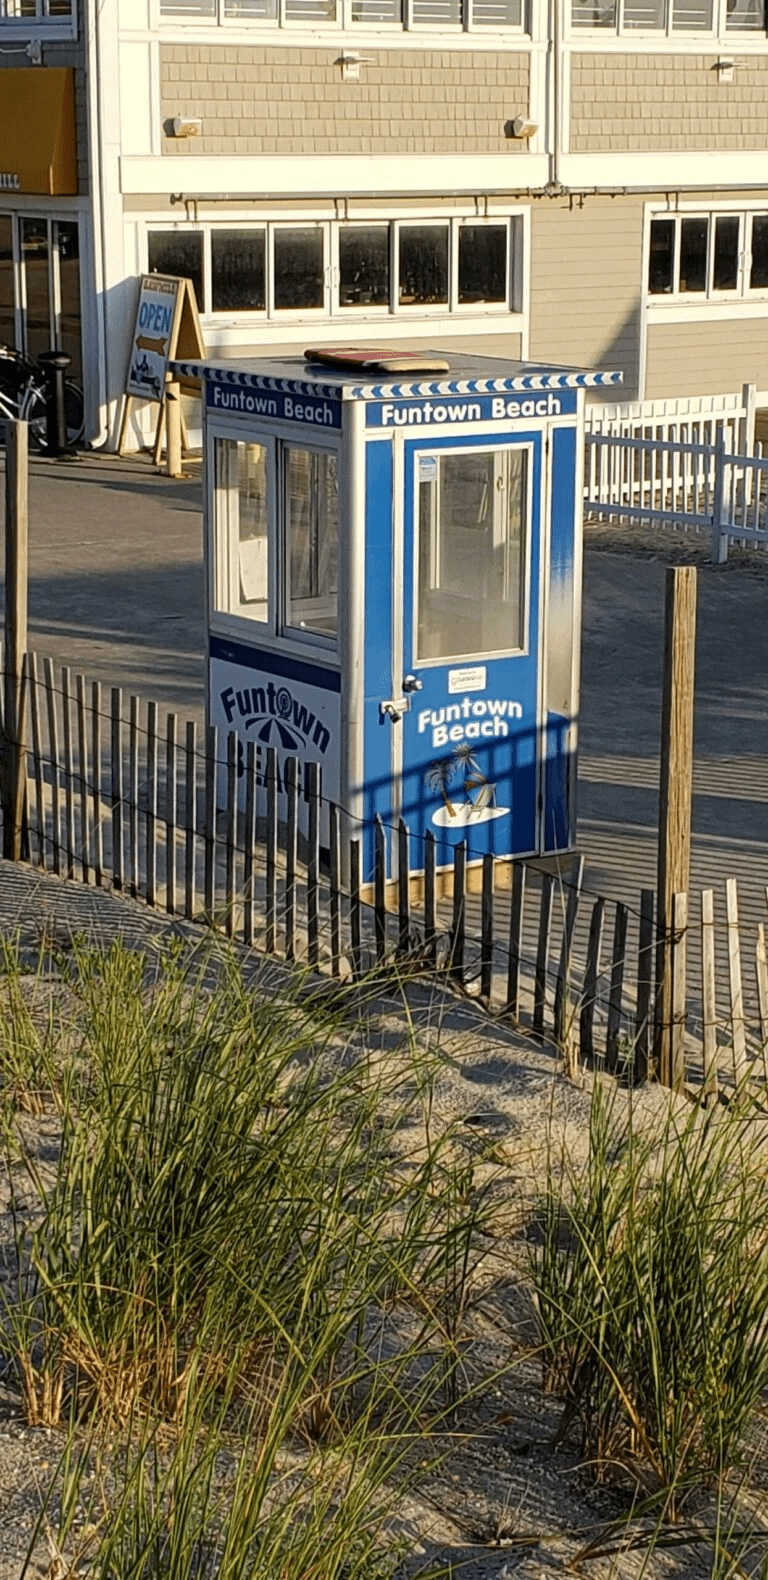 Ticket booths for streamlining events